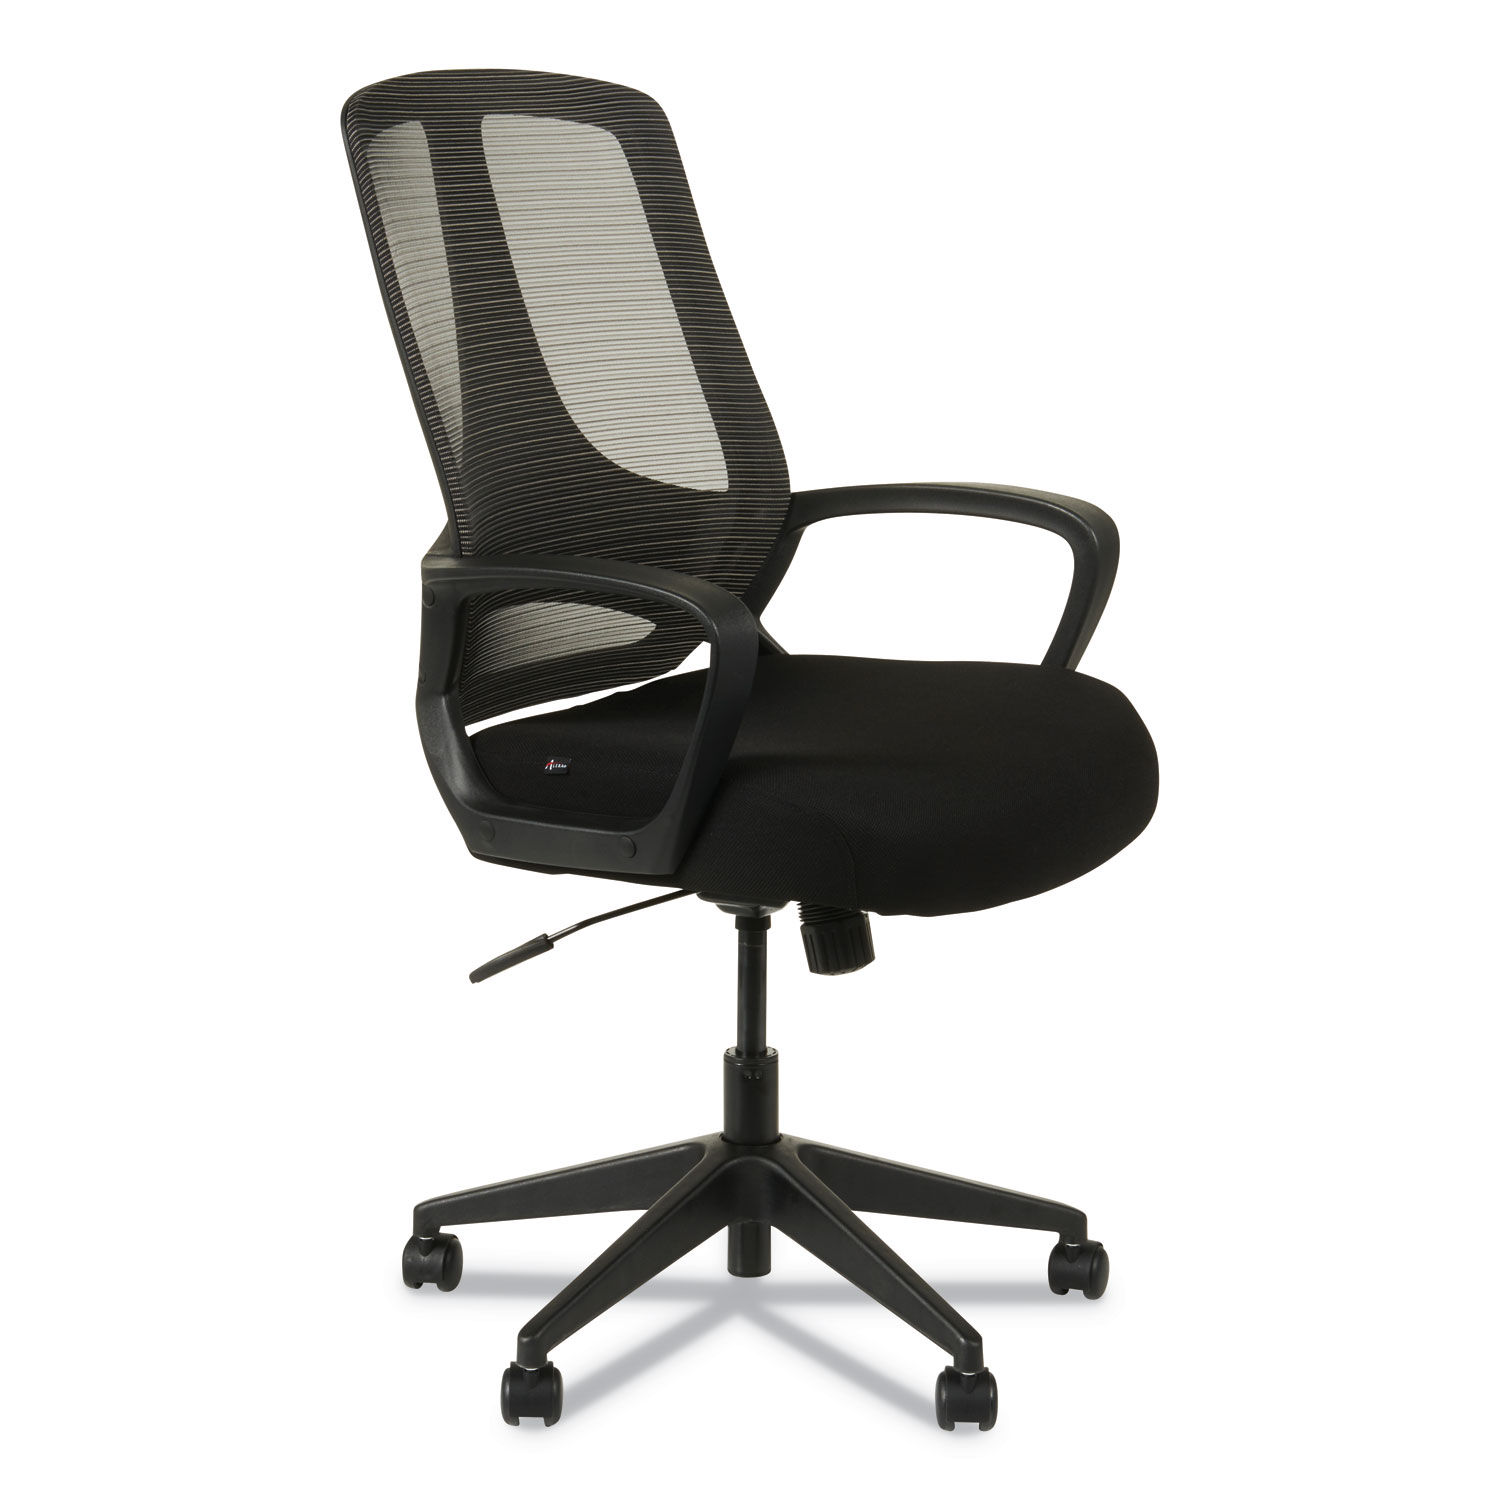 Alera MB Series Mesh Mid-Back Office Chair Supports Up to 275 lb, 18.11" to 21.65" Seat Height, Black